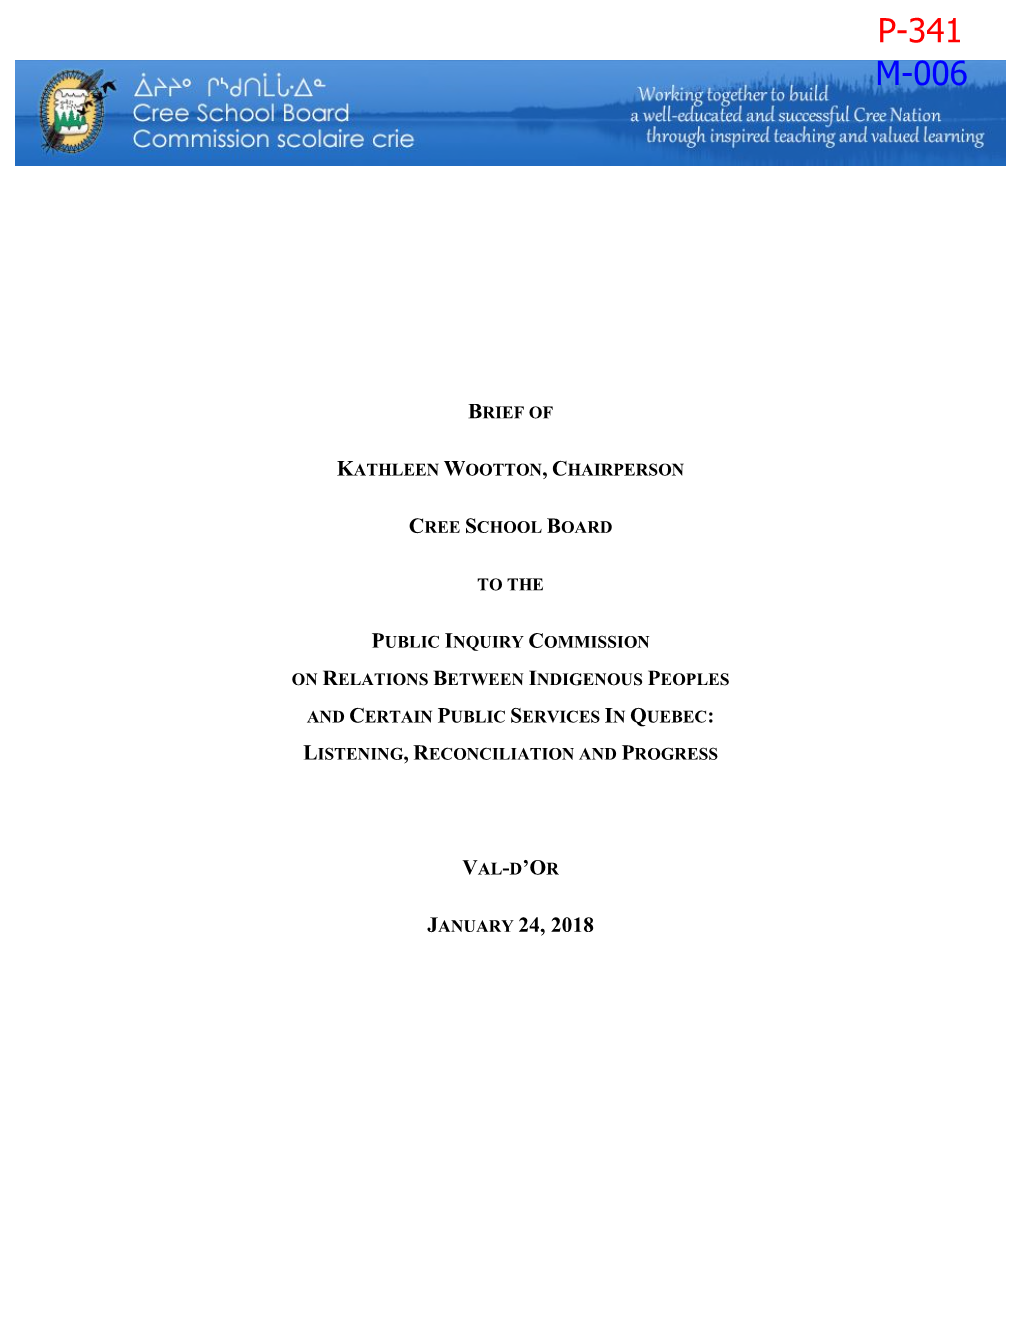 P-341: Brief of Kathleen Wootton, Chairperson, Cree School Board To